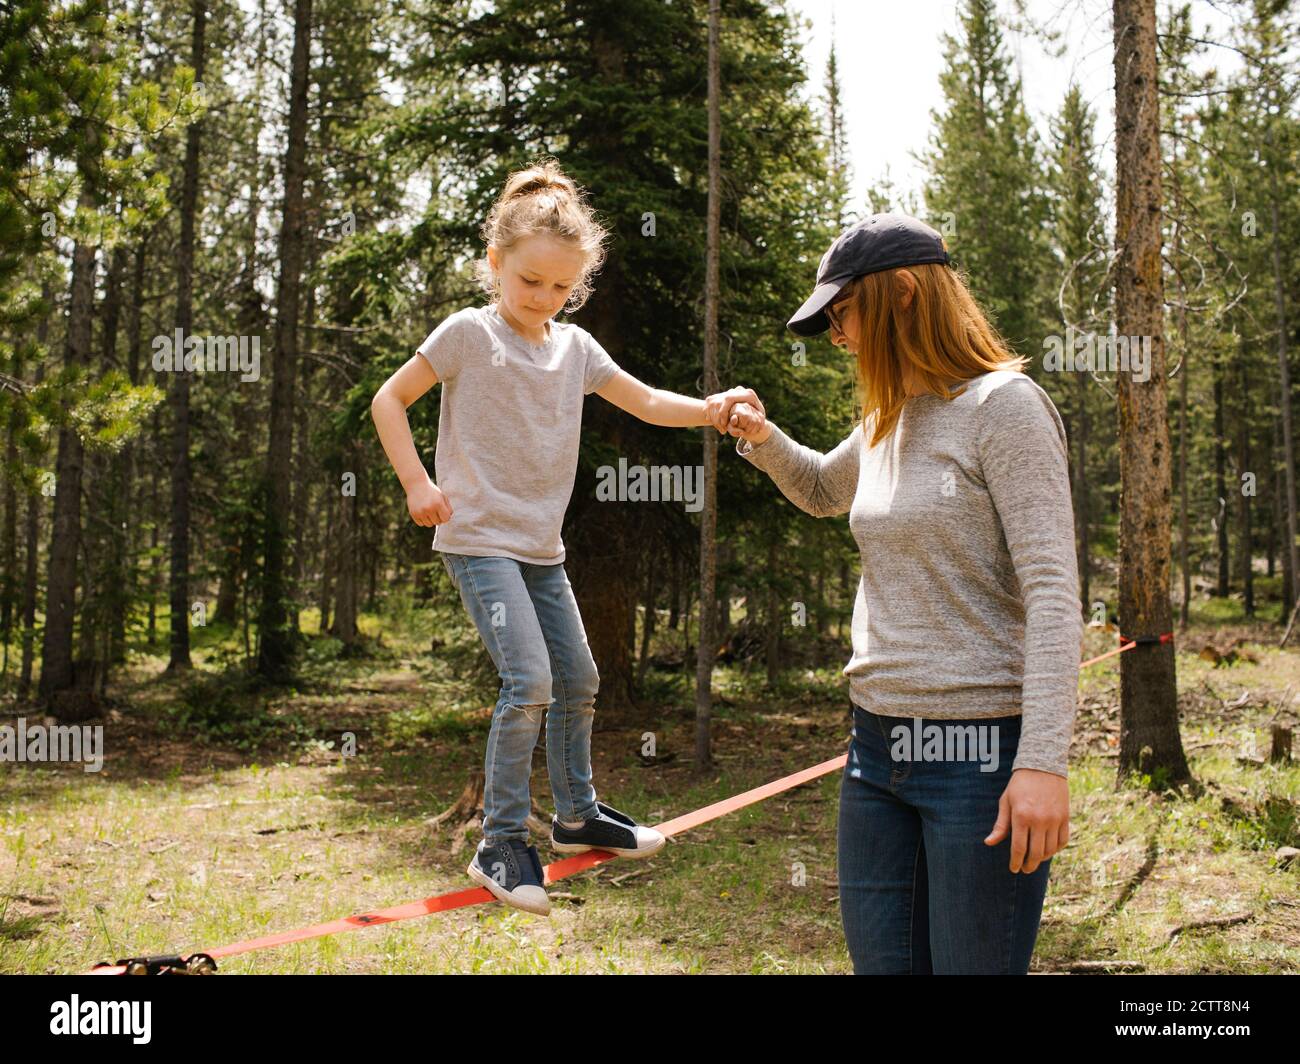 Mother assisting daughter (6-7) walking on slackline in forest, Wasatch-Cache National Forest Stock Photo